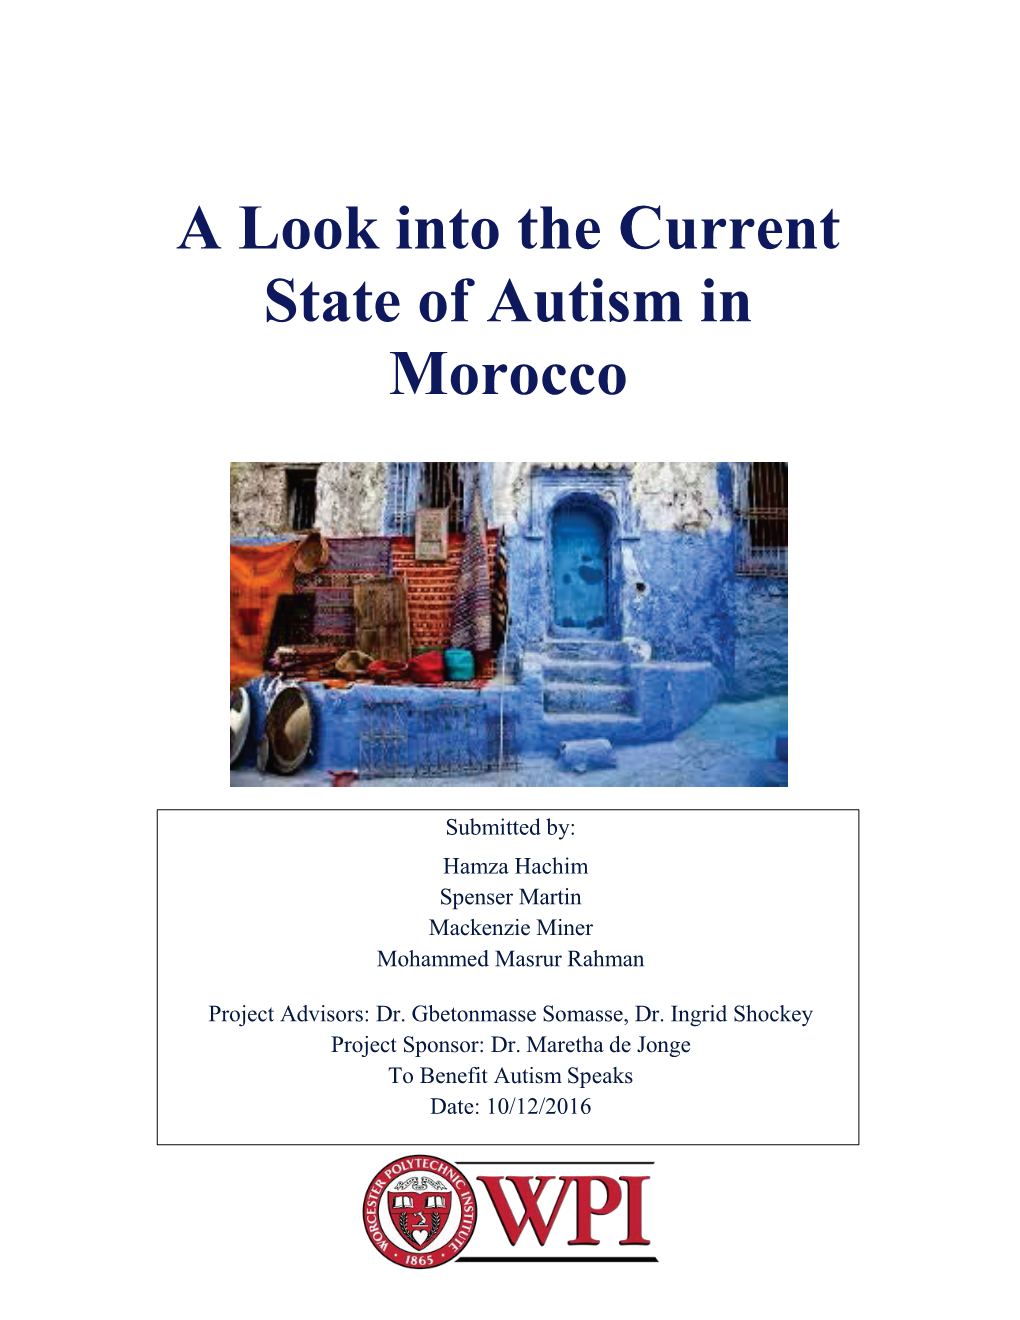 A Look Into the Current State of Autism in Morocco